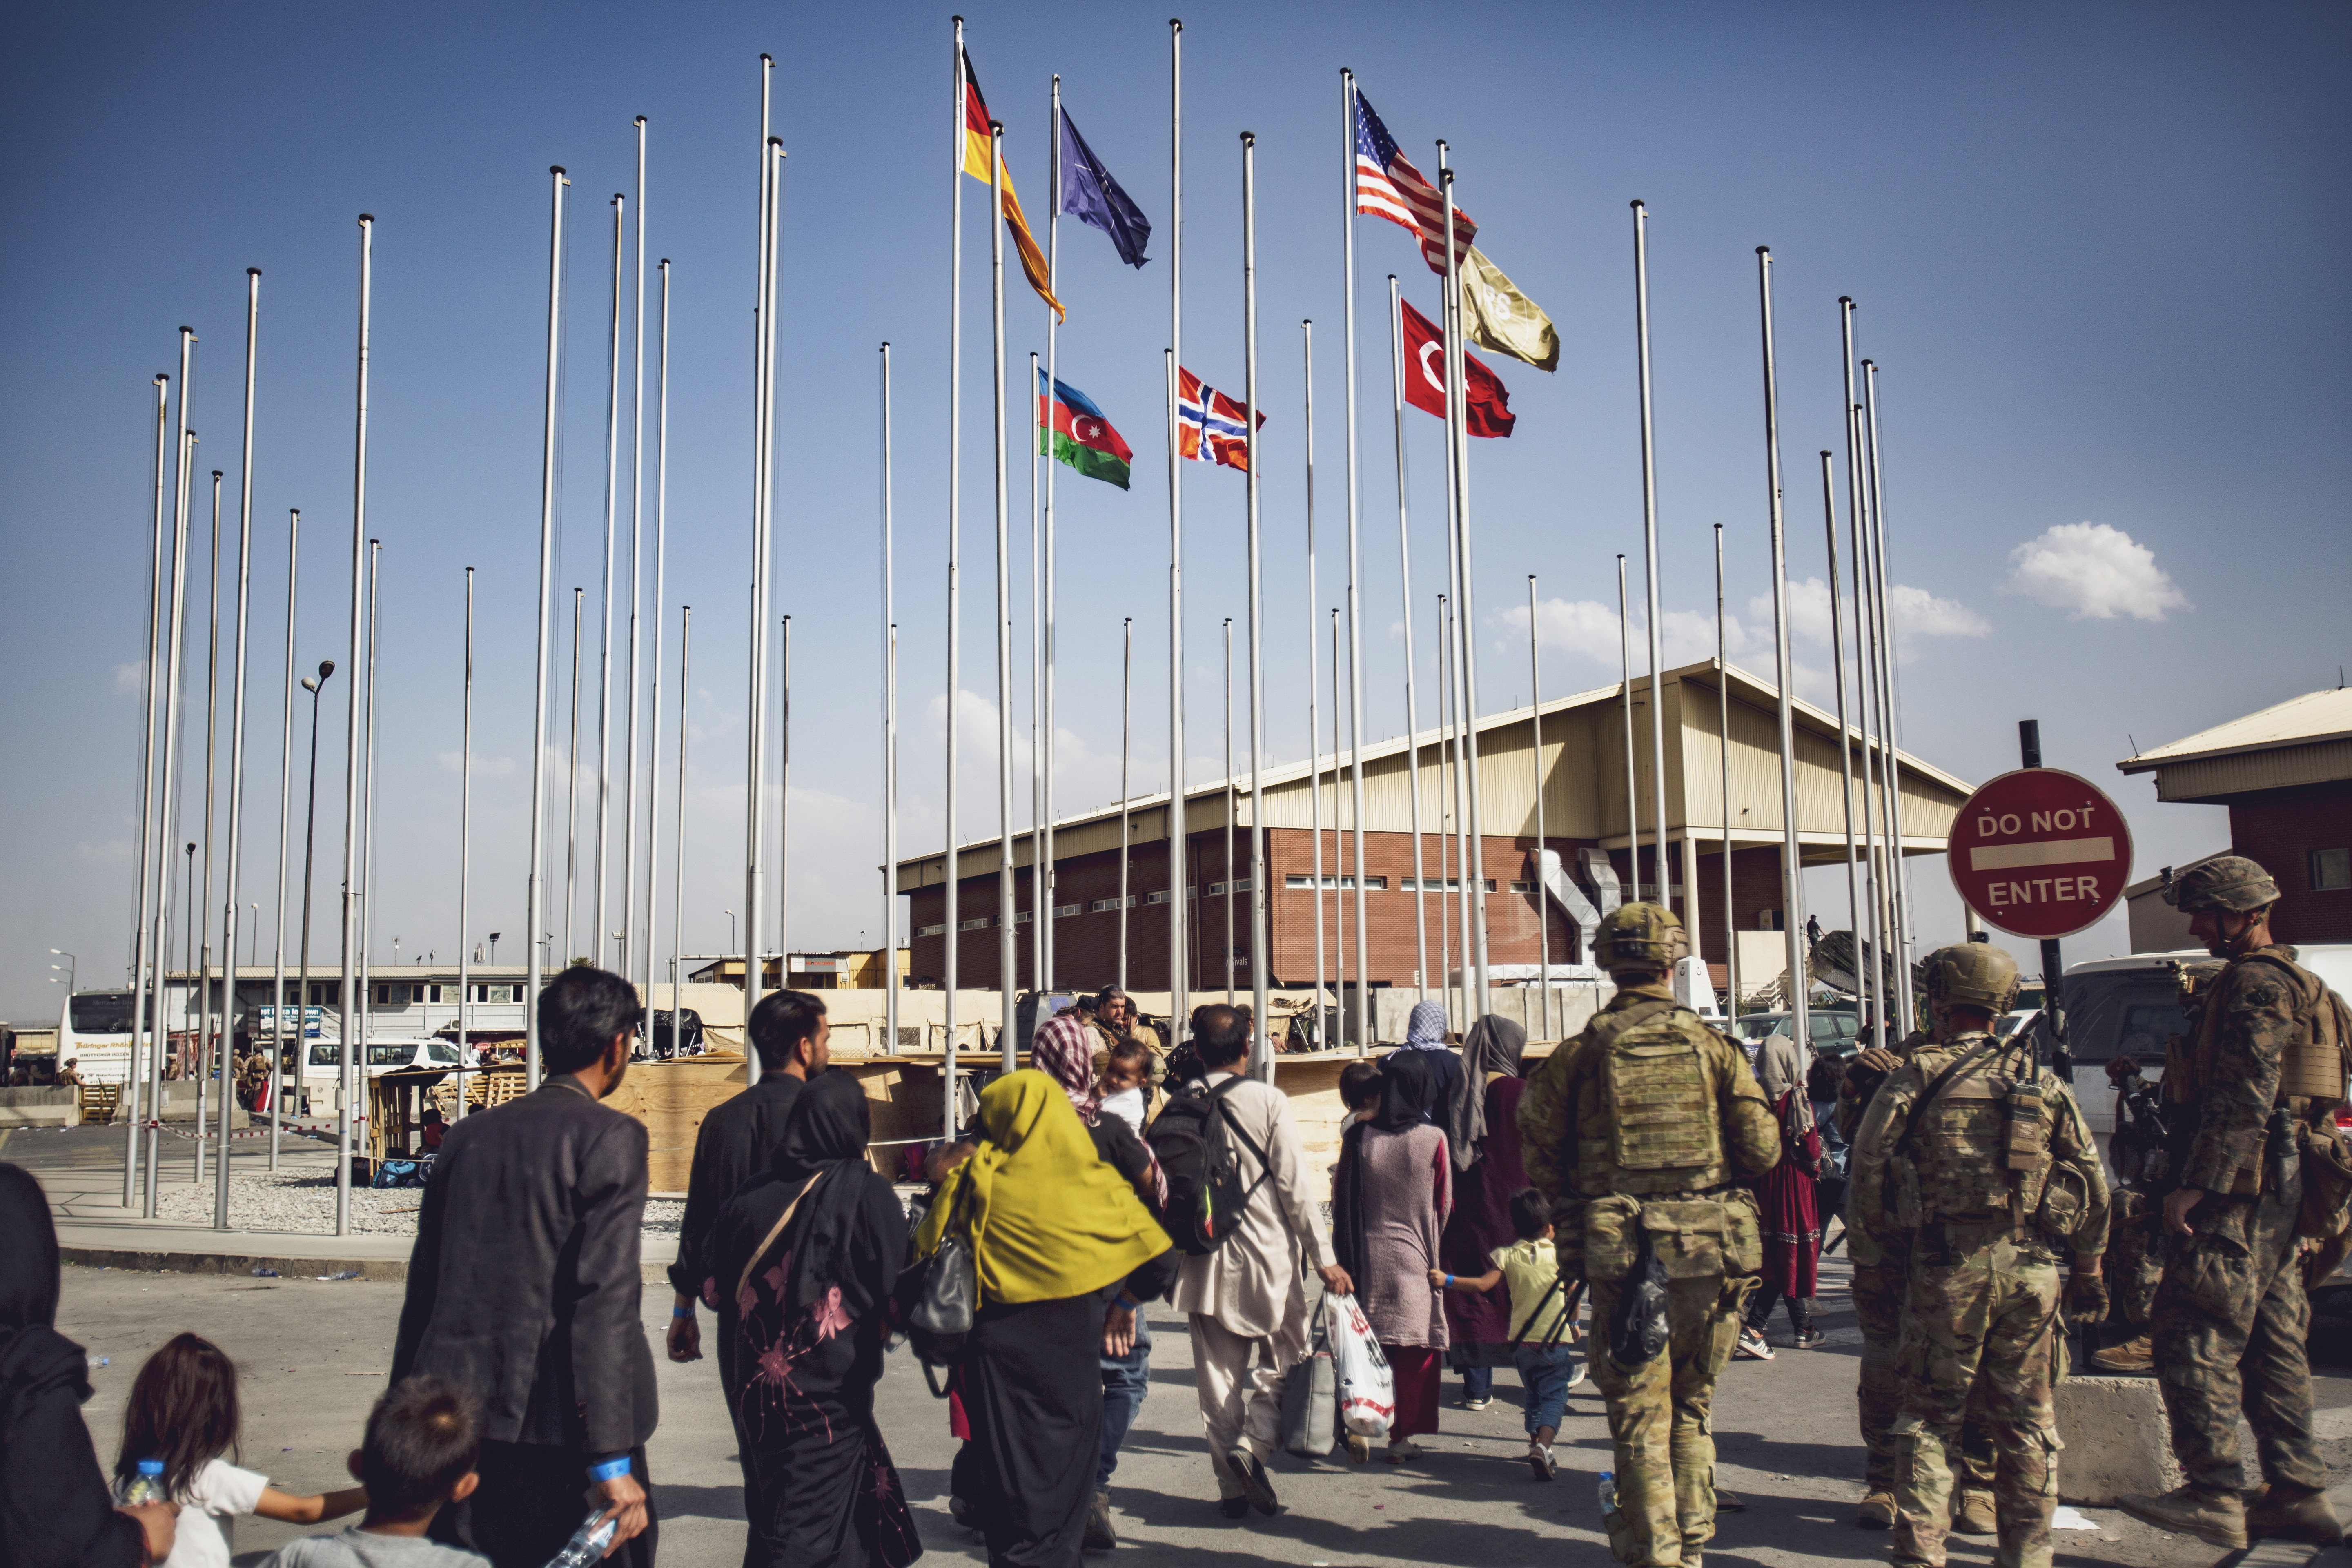 Soldiers assigned to the 82nd Airborne Division escort a group of people to the terminal at Hamid Karzai International Airport in Kabul, Afghanistan